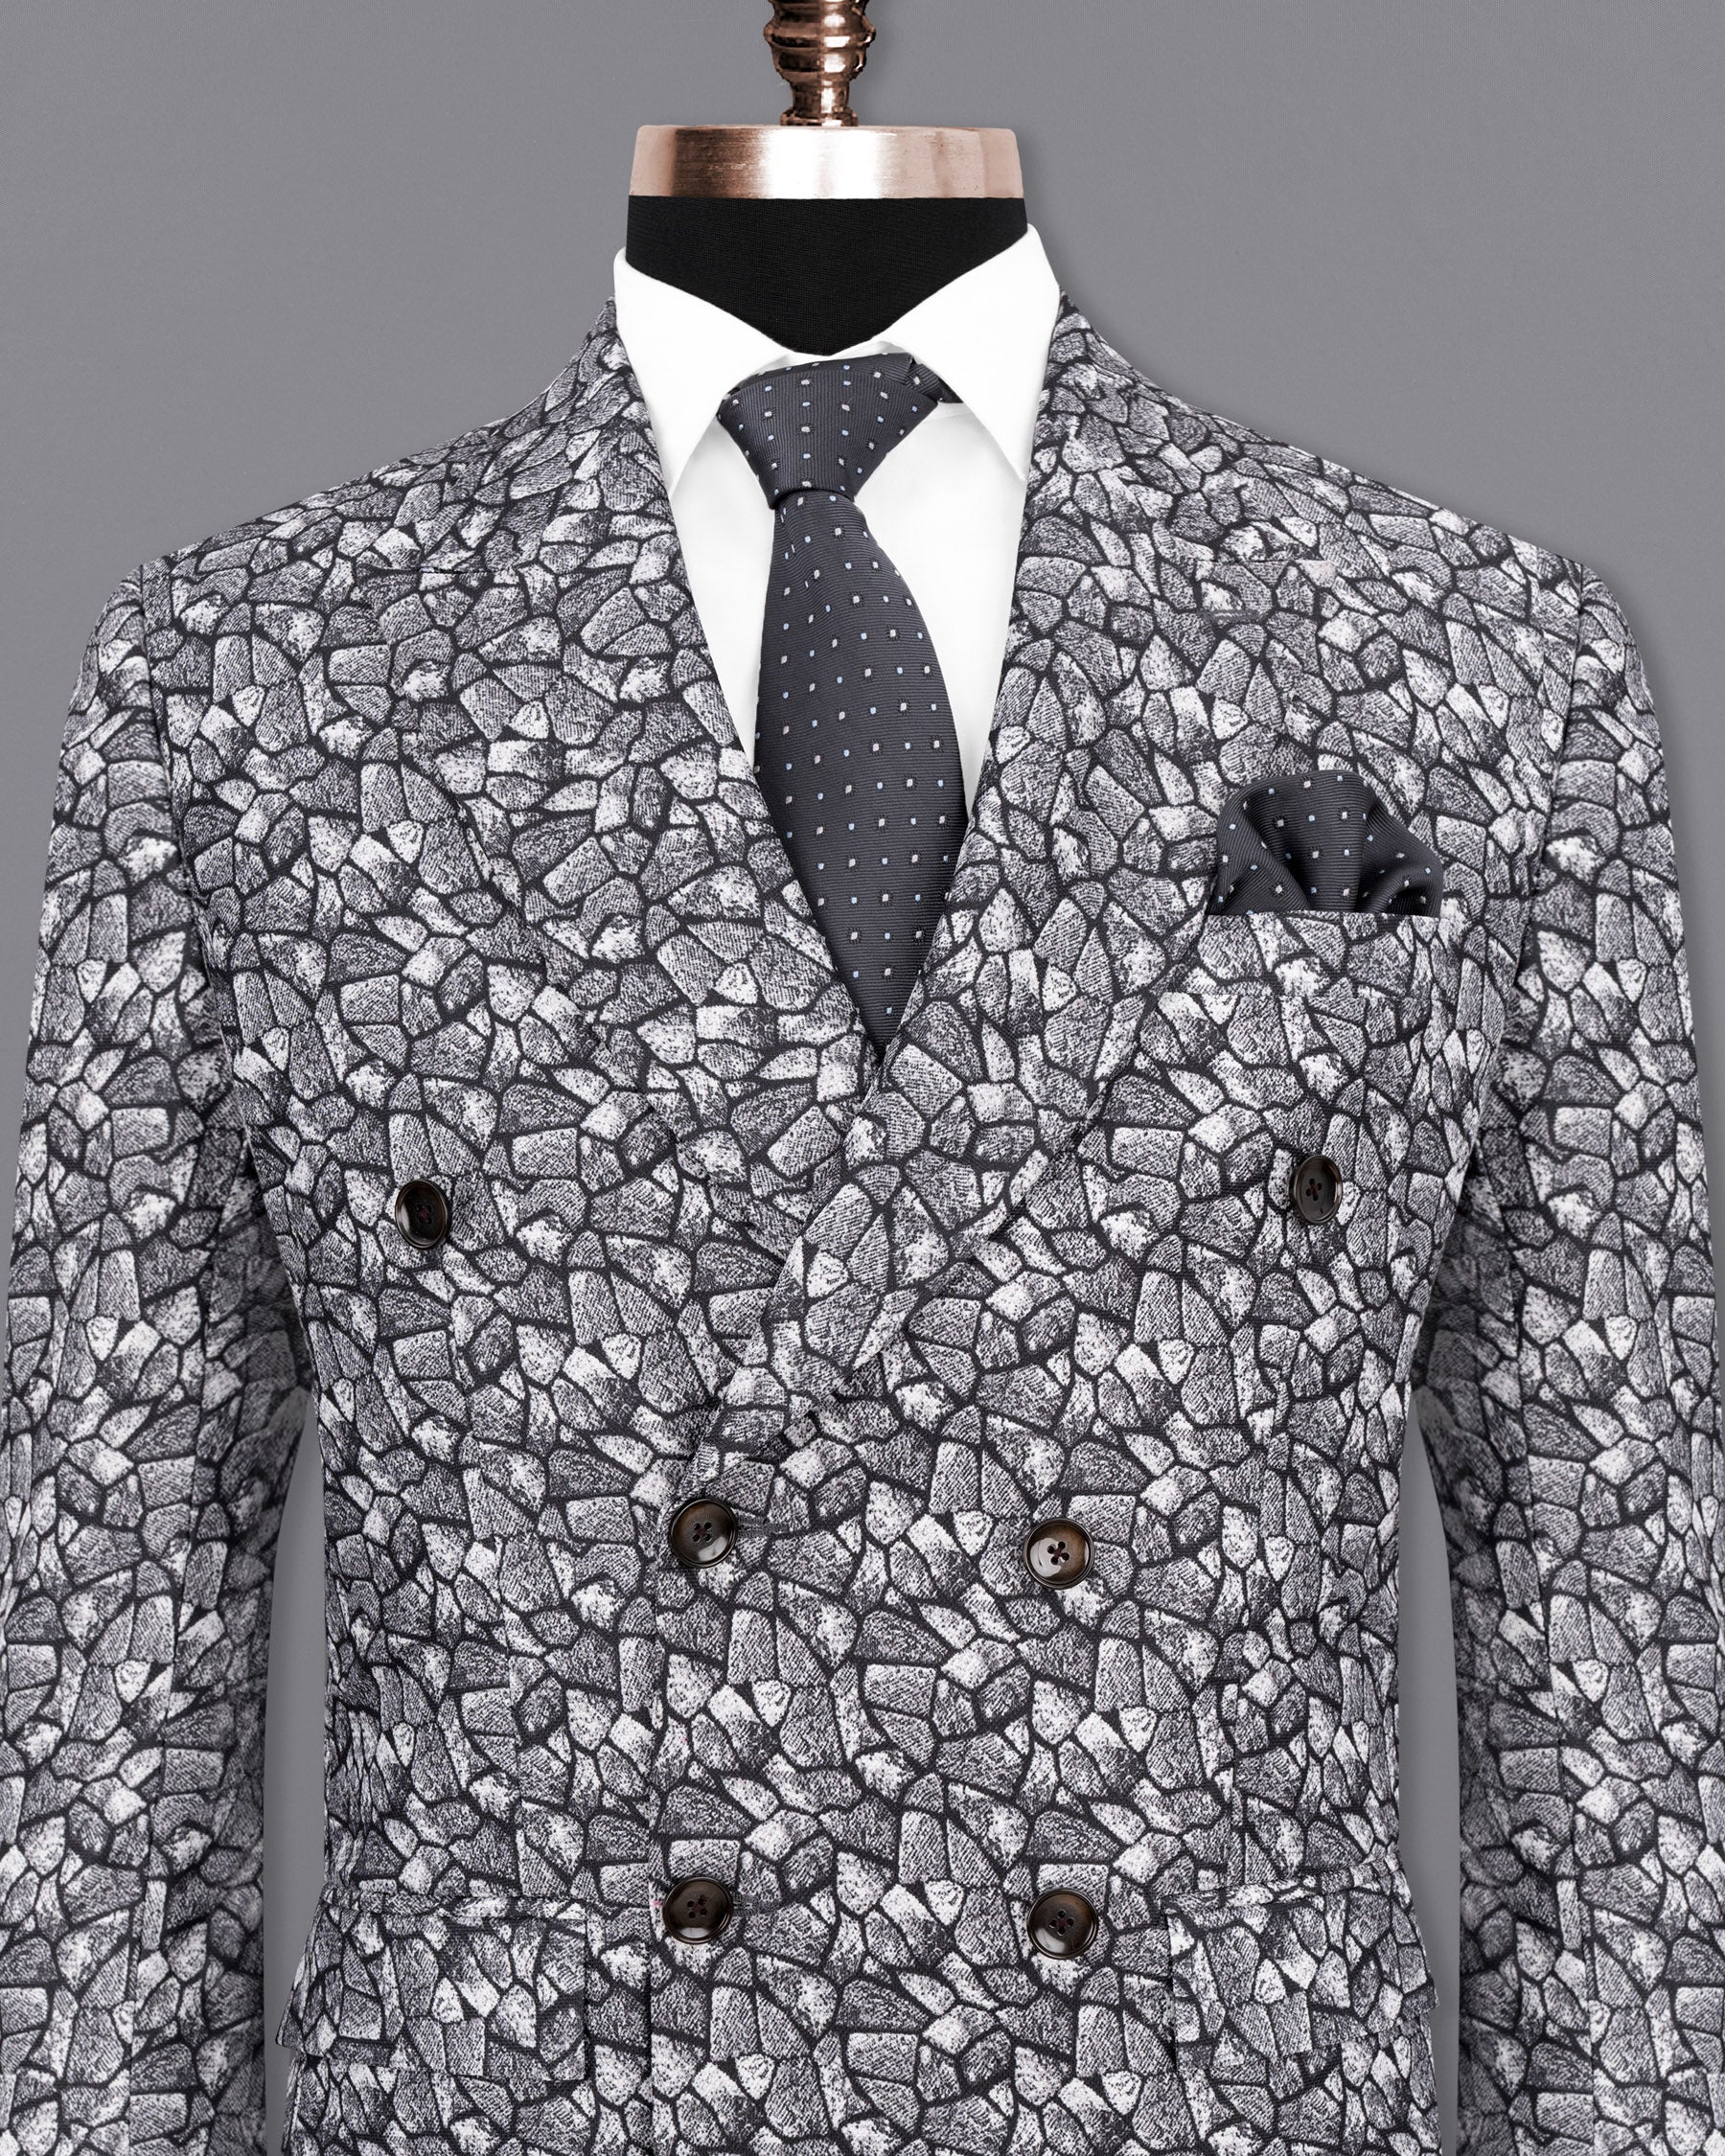 Charade Grey and White Double Breasted Designer Blazer BL1810-DB-36,BL1810-DB-38,BL1810-DB-40,BL1810-DB2-42,BL1810-DB-44,BL1810-DB-46,BL1810-DB-48,BL1810-DB-50,BL1810-DB-52,BL1810-DB-54,BL1810-DB-56,BL1810-DB-58,BL1810-DB-60